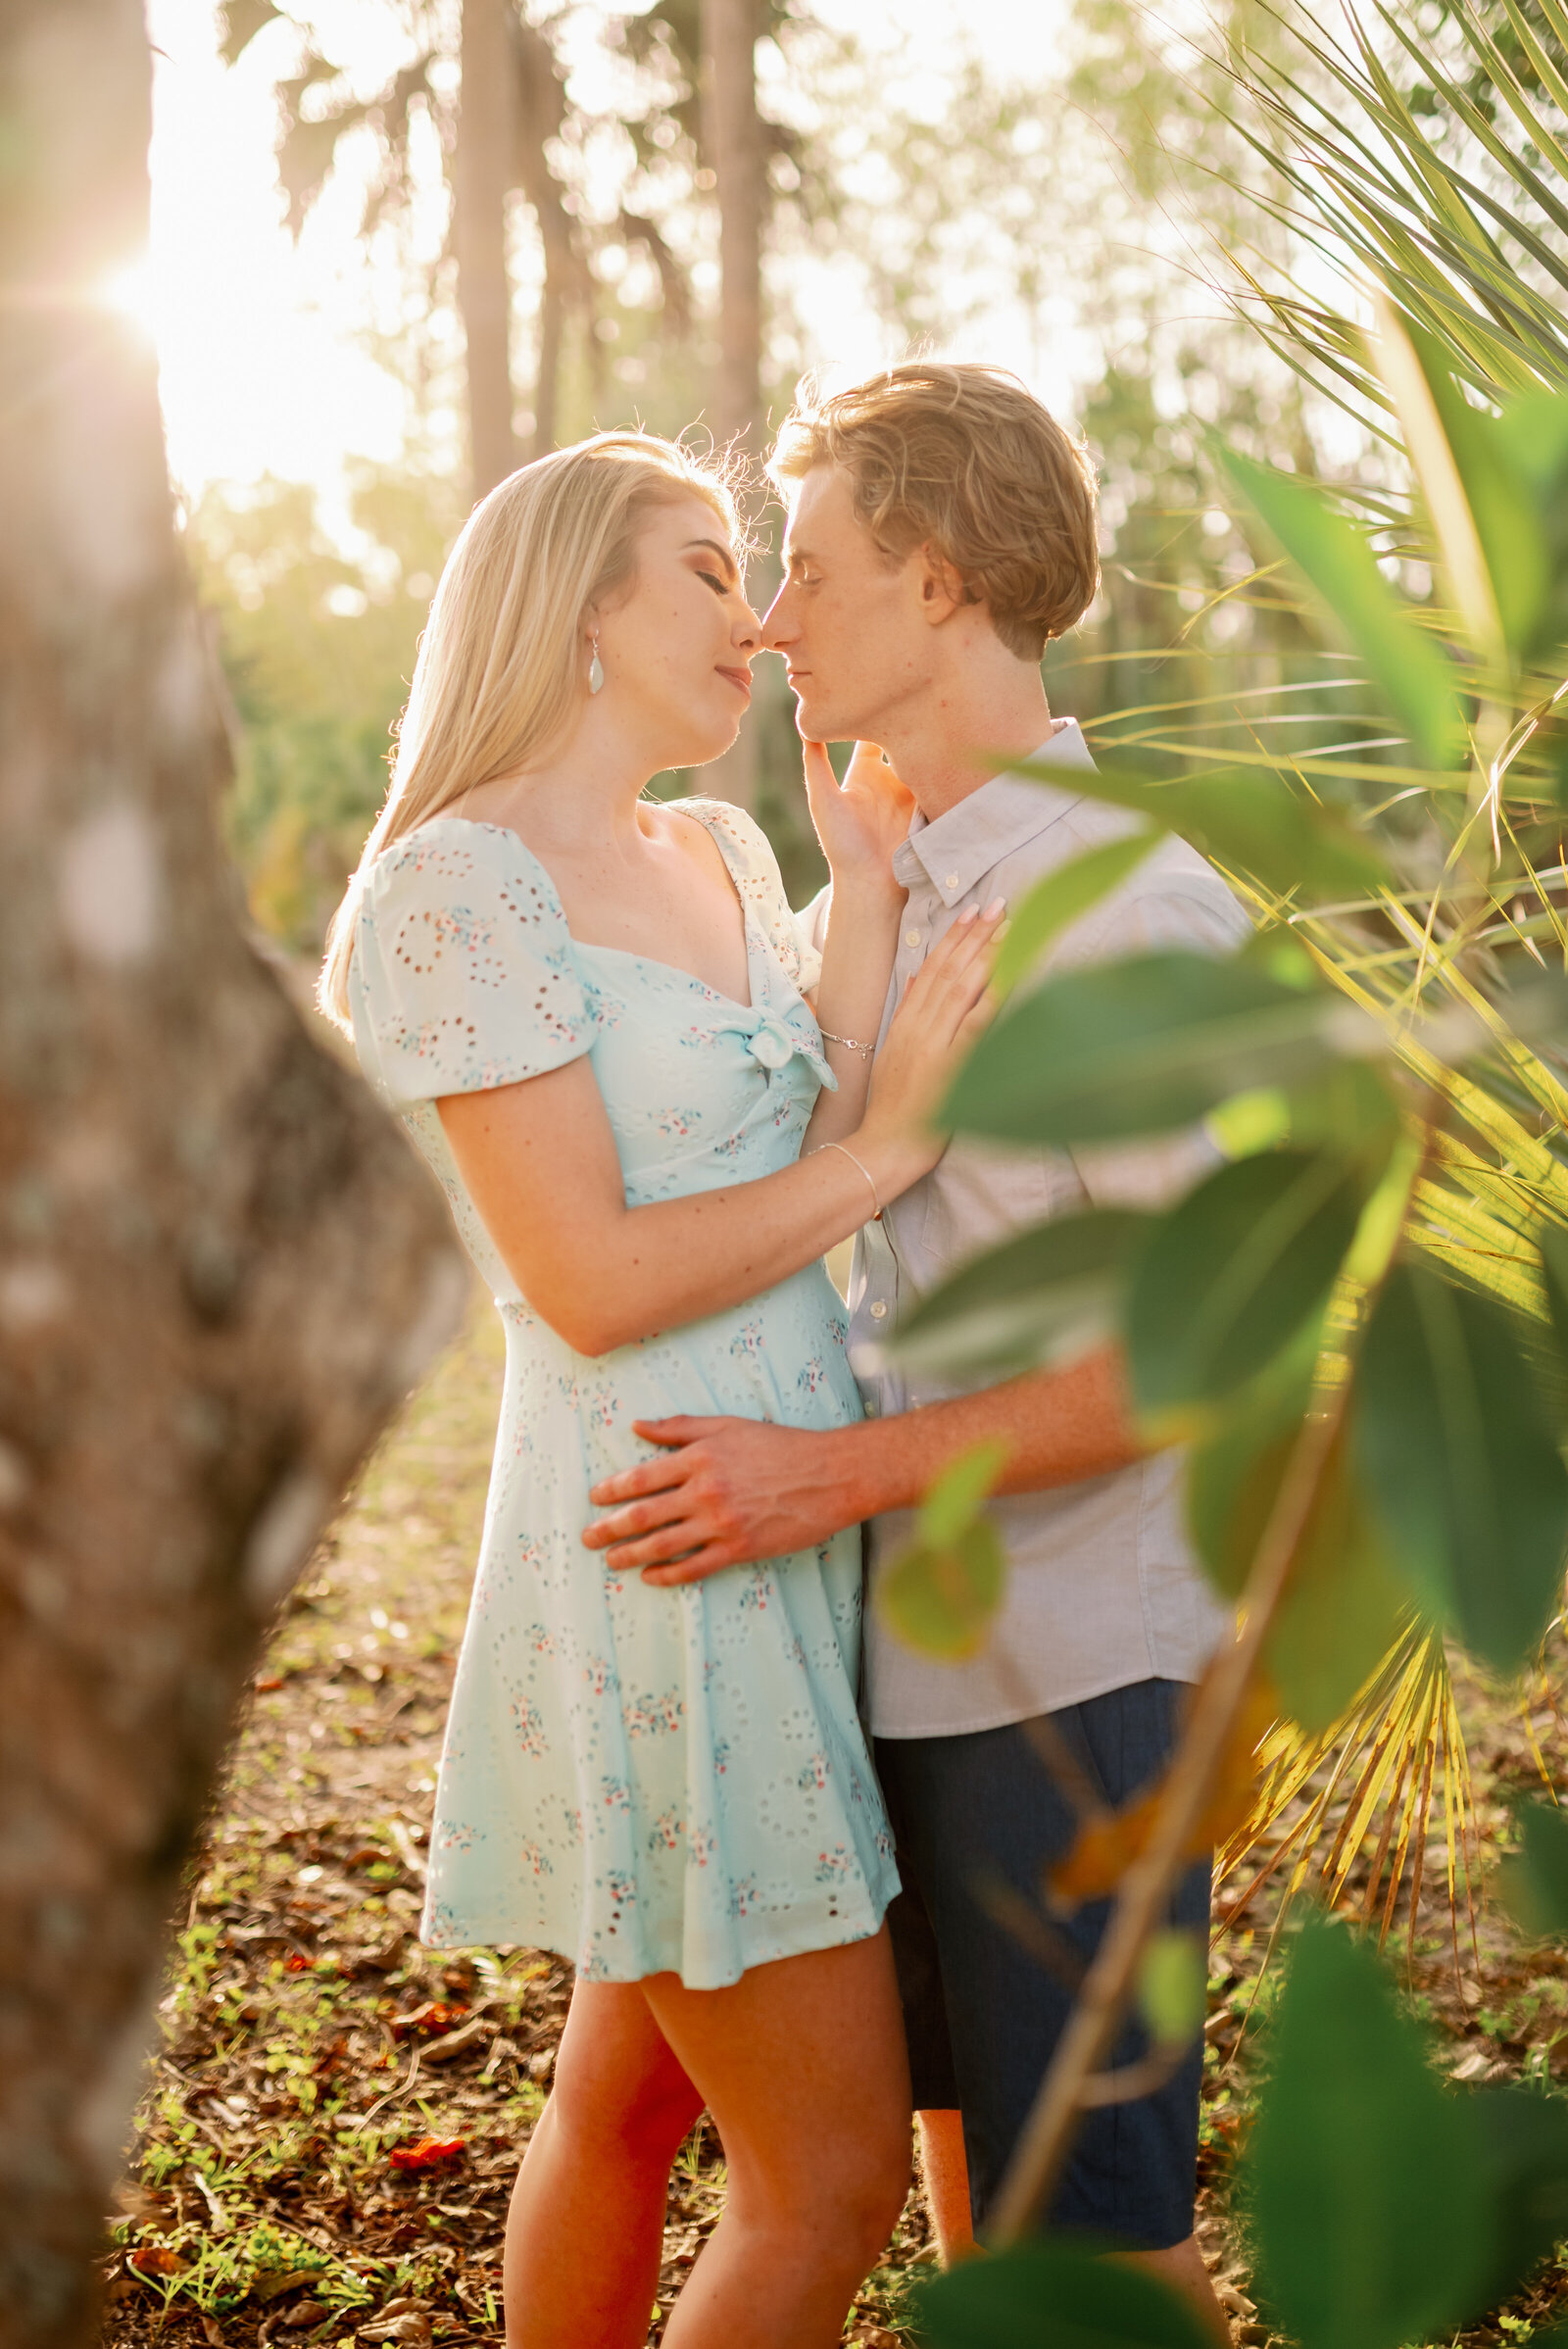 engaged couple about to share a passionate kiss with sunlight peeking through the trees behind them and leaves in the foreground